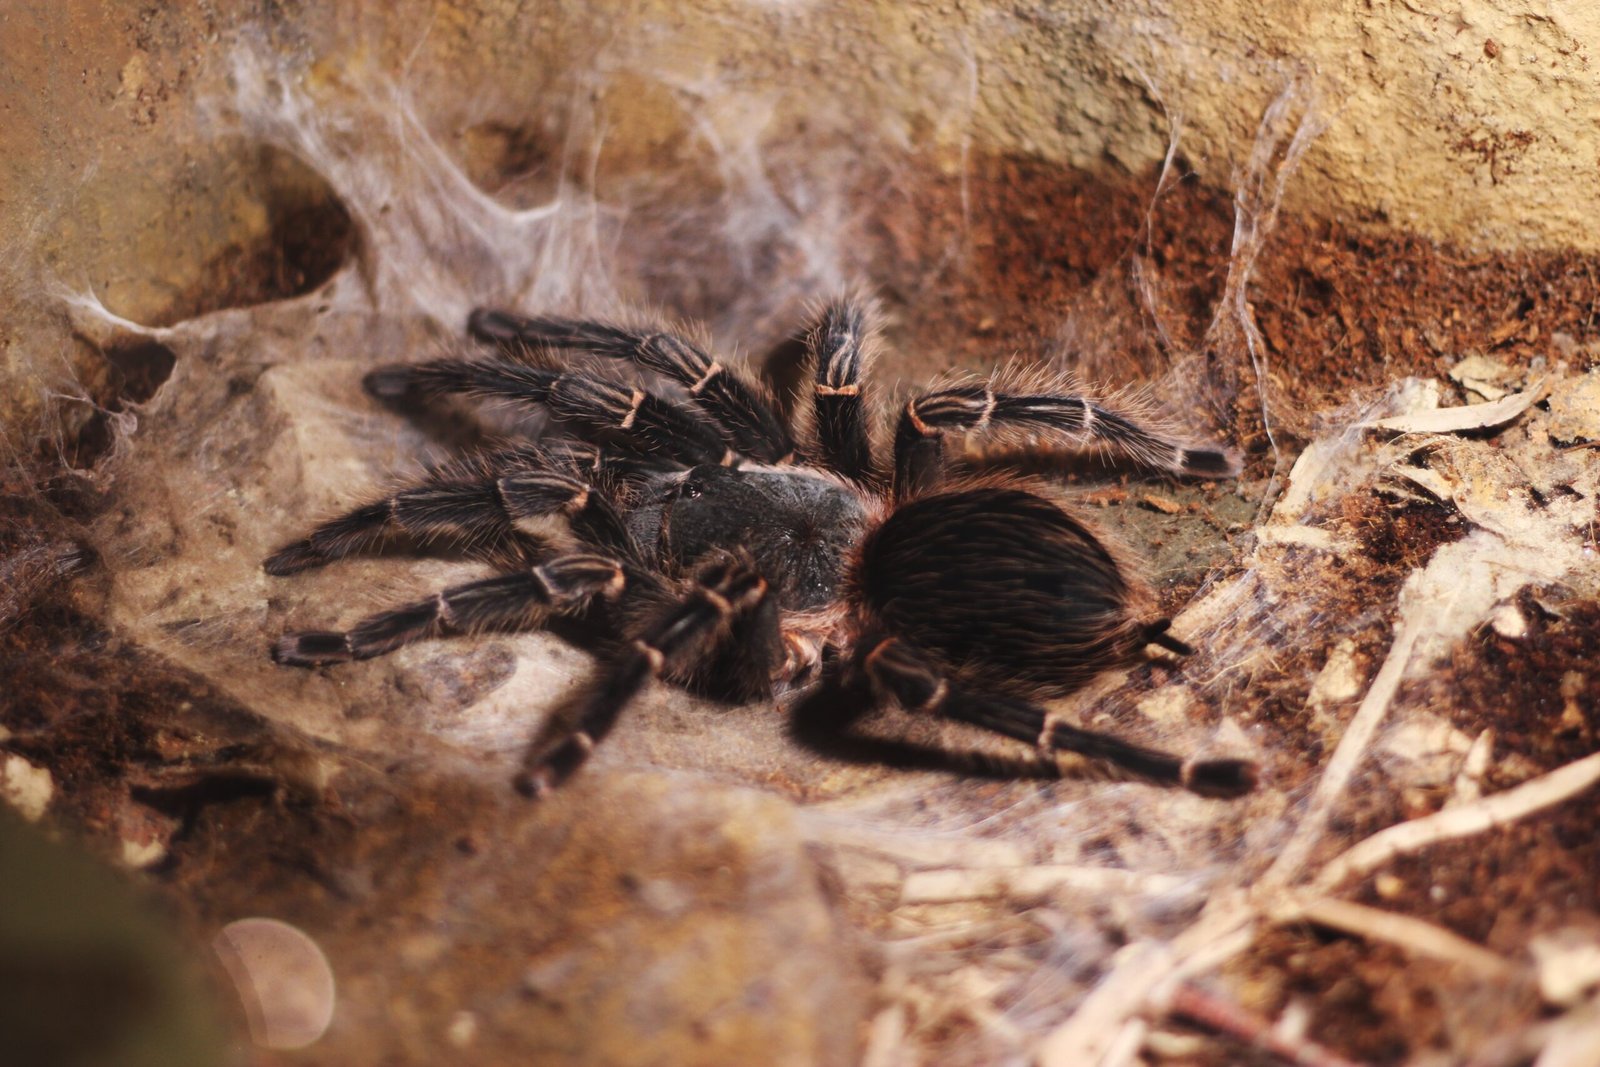 How Do You Differentiate Between Old World And New World Tarantula Species?